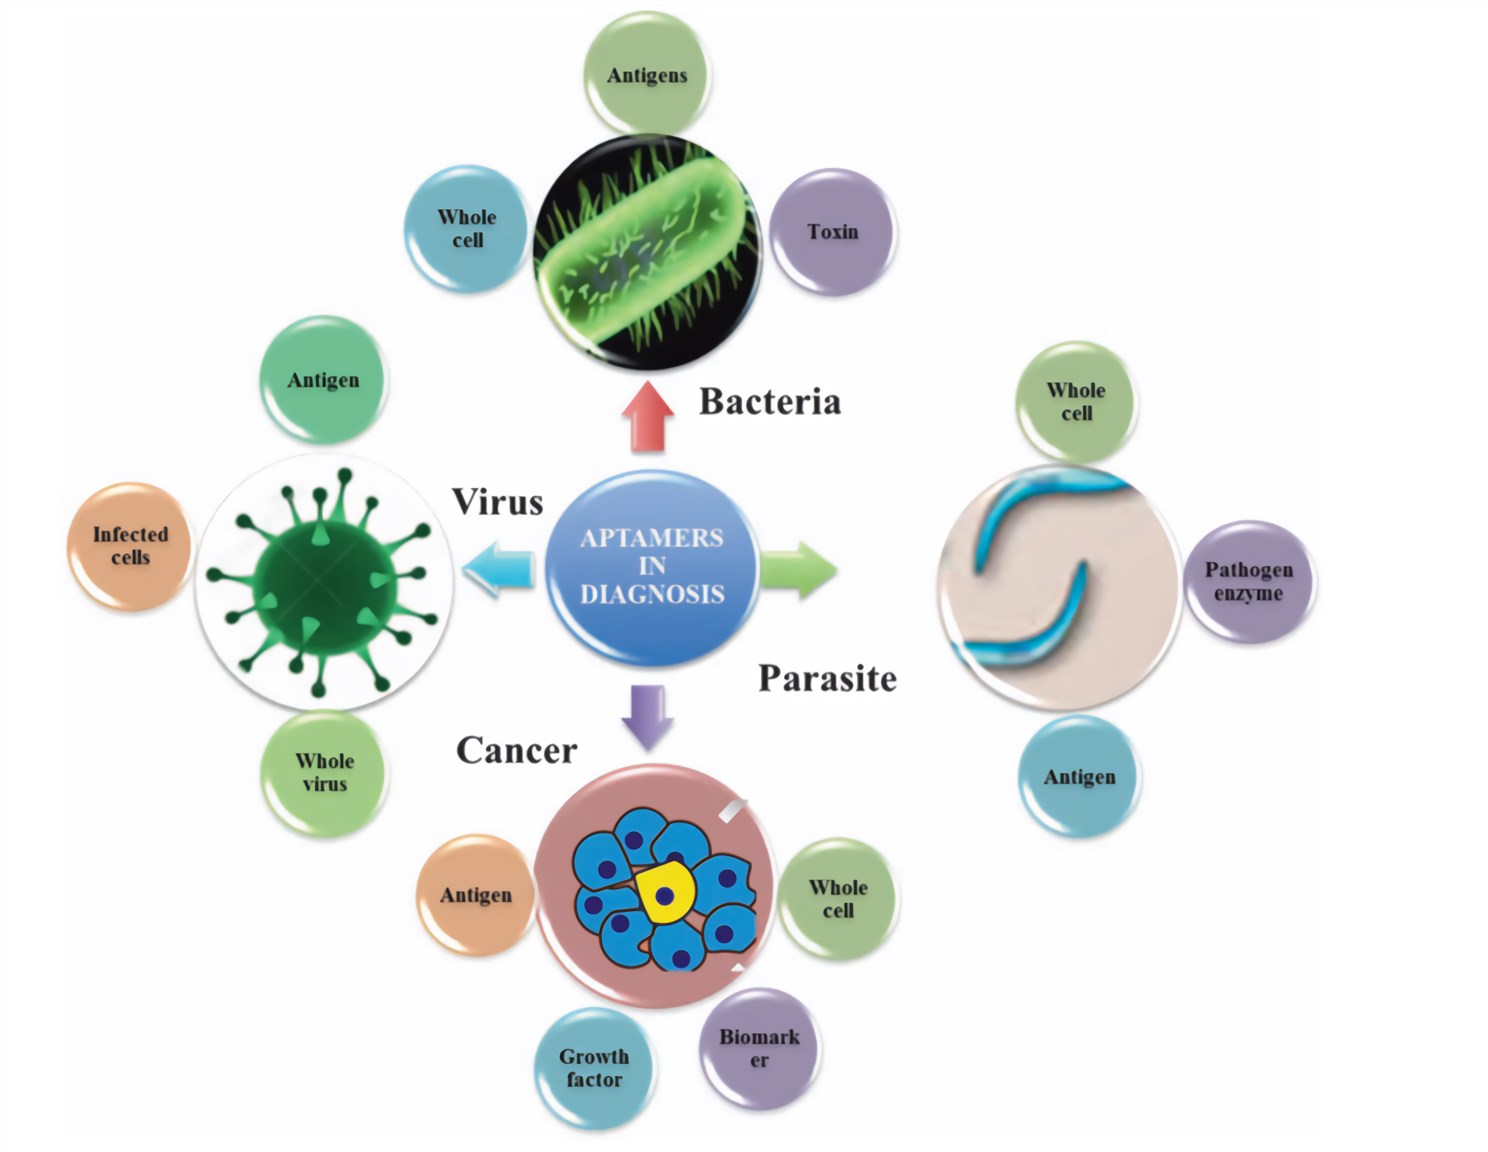 Application of aptamers in the field of diagnosis.